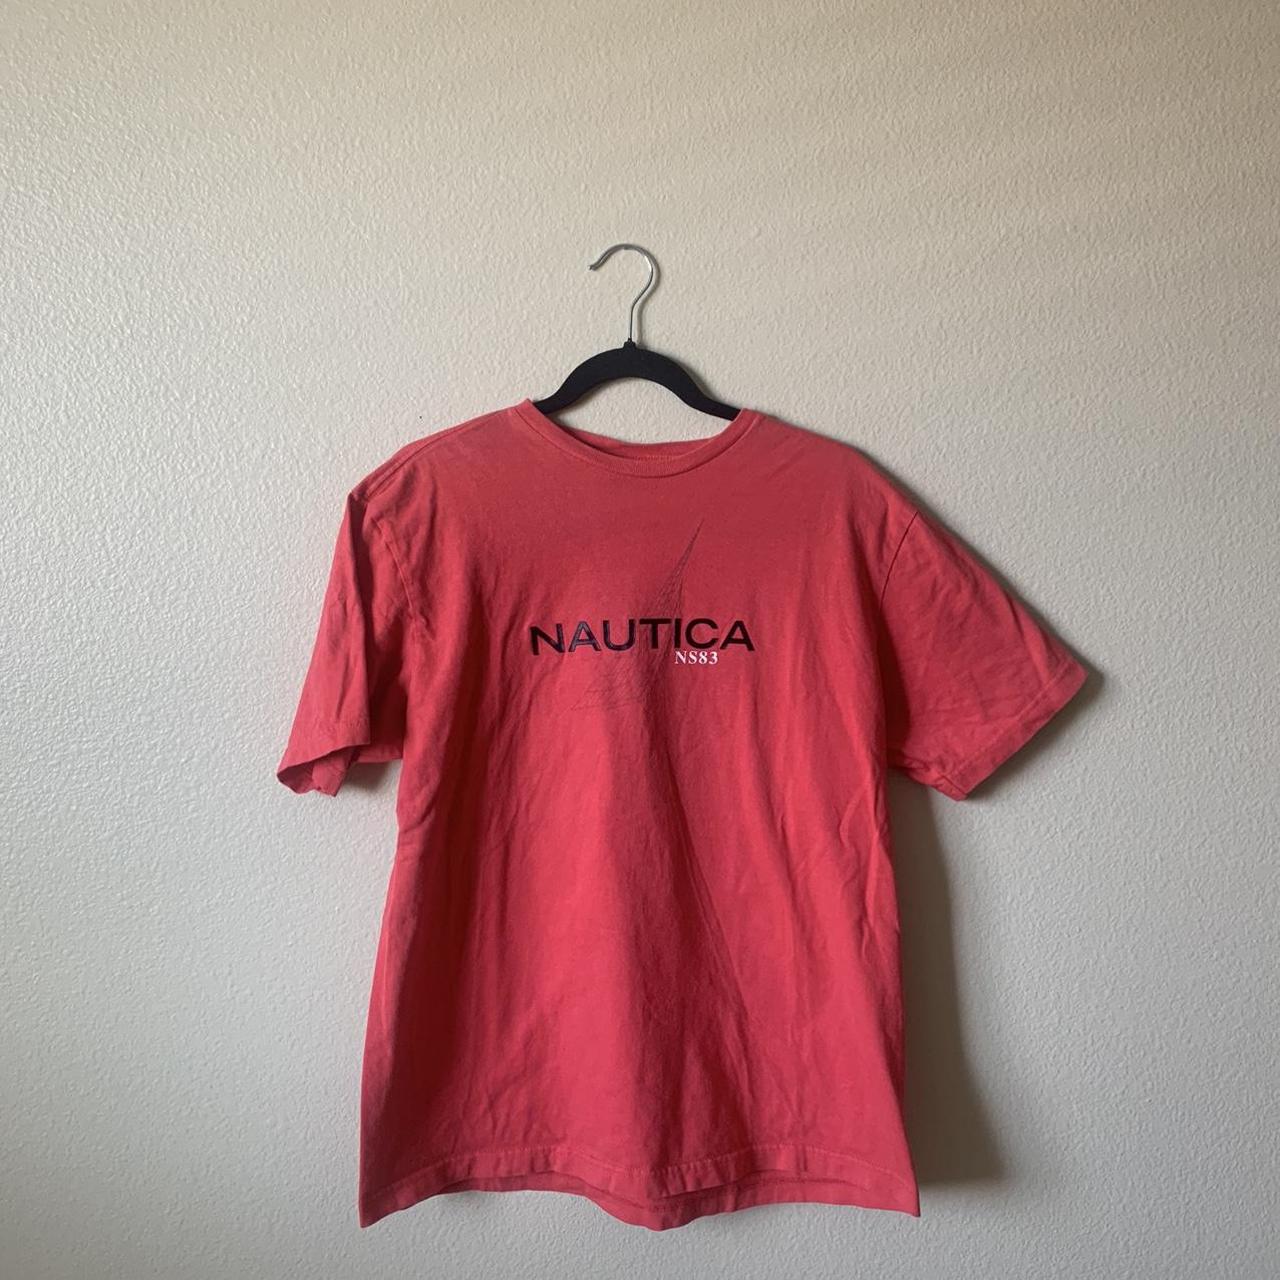 Nautica mens red graphic T-shirt. Size M , Width 